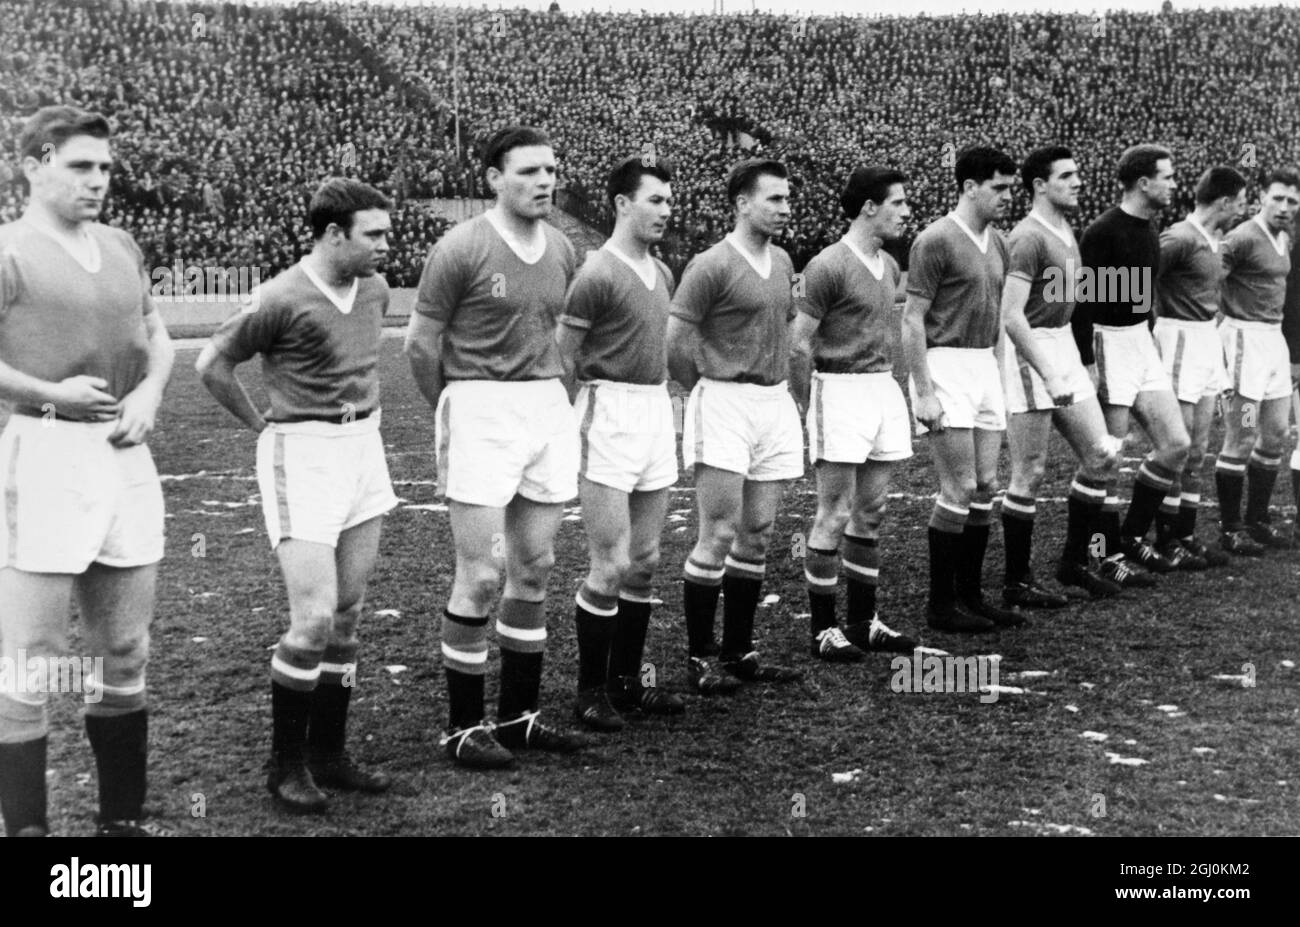 The last picture of Manchester United as a team before the Munich aircrash. Left to Right, Duncan Edwards, Eddie Colman, Mark Jones, Ken Morgans, Bobby Charlton, Dennis Viollet, Tommy Taylor, Billy Foulkes, Harry Gregg, Albert Scanlon, Roger Byrne. 6th February 1958. Stock Photo